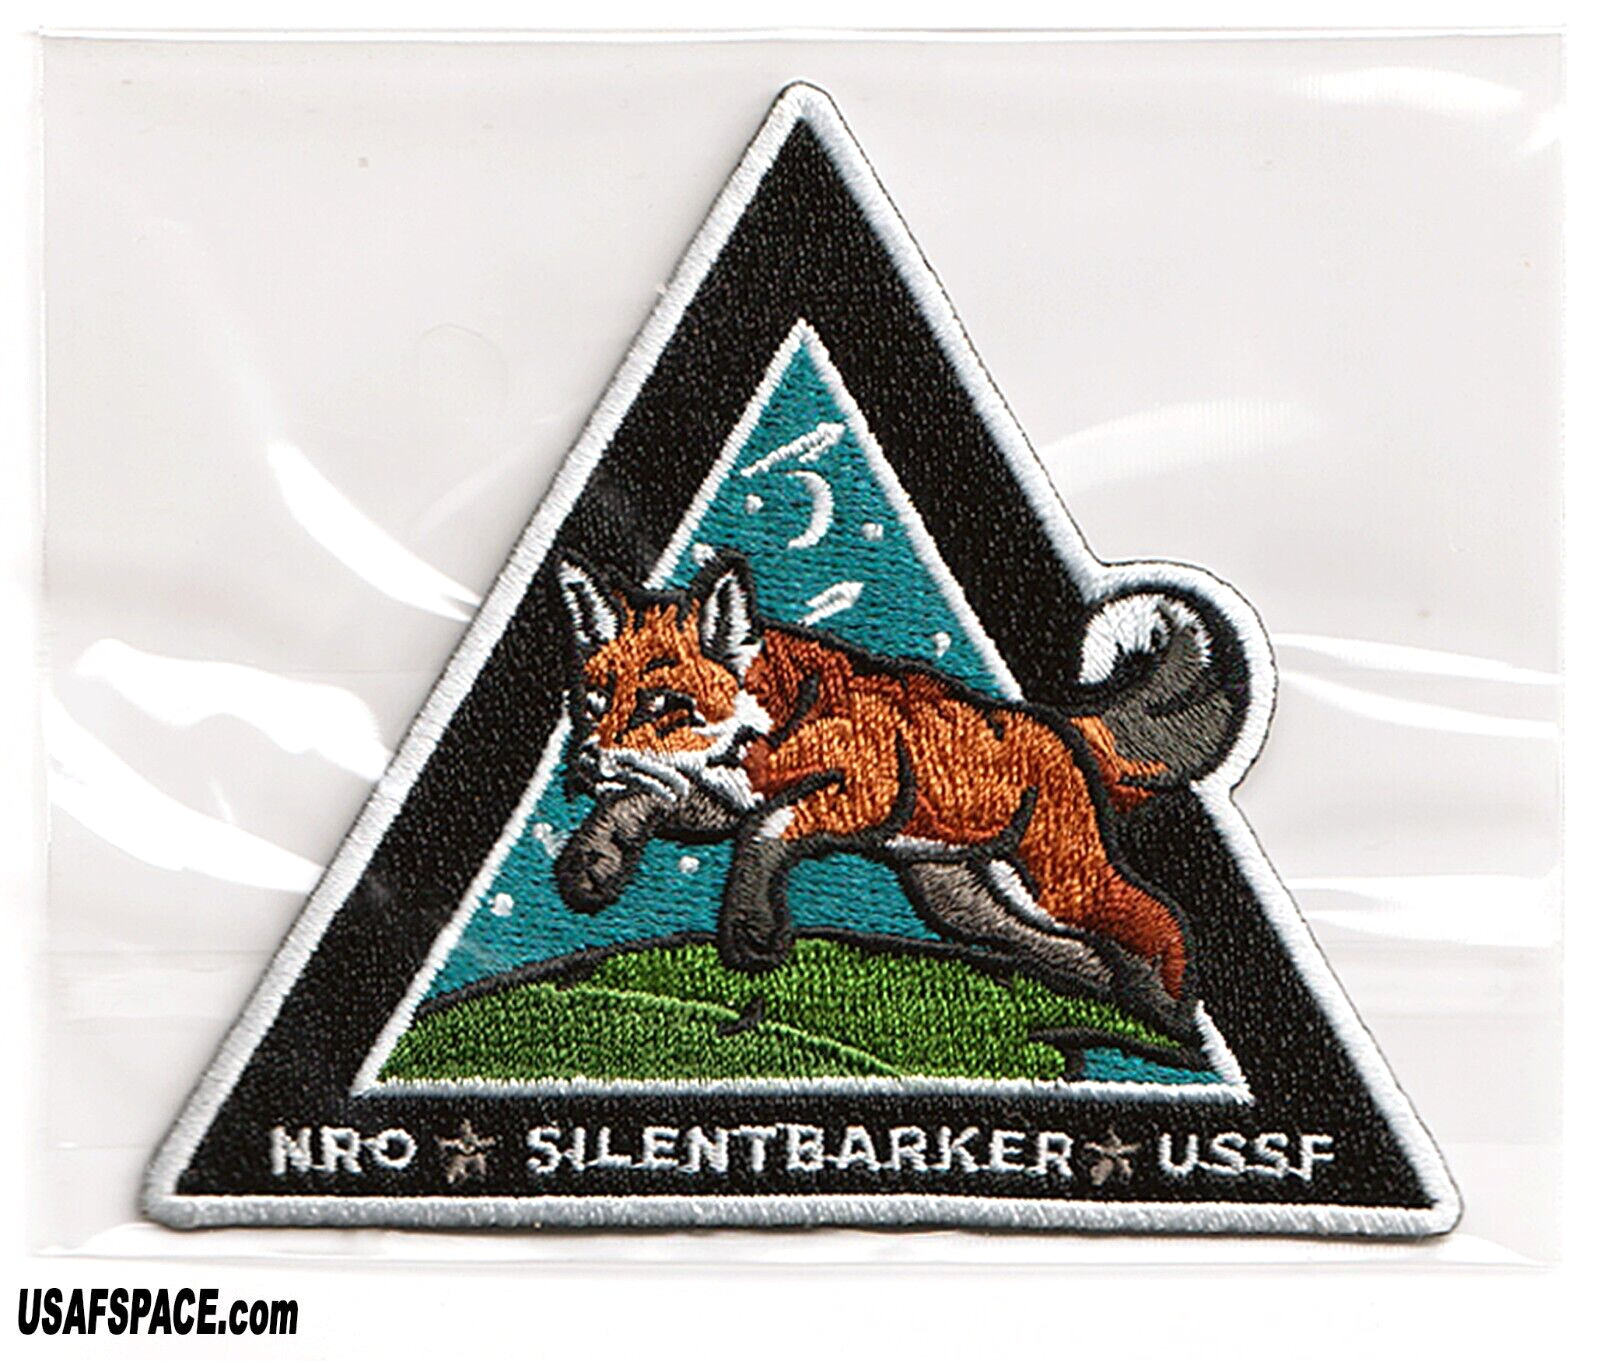 Authentic NROL-107-Silent Barker-ATLAS V-USSF DOD NRO Classified SATELLITE PATCH